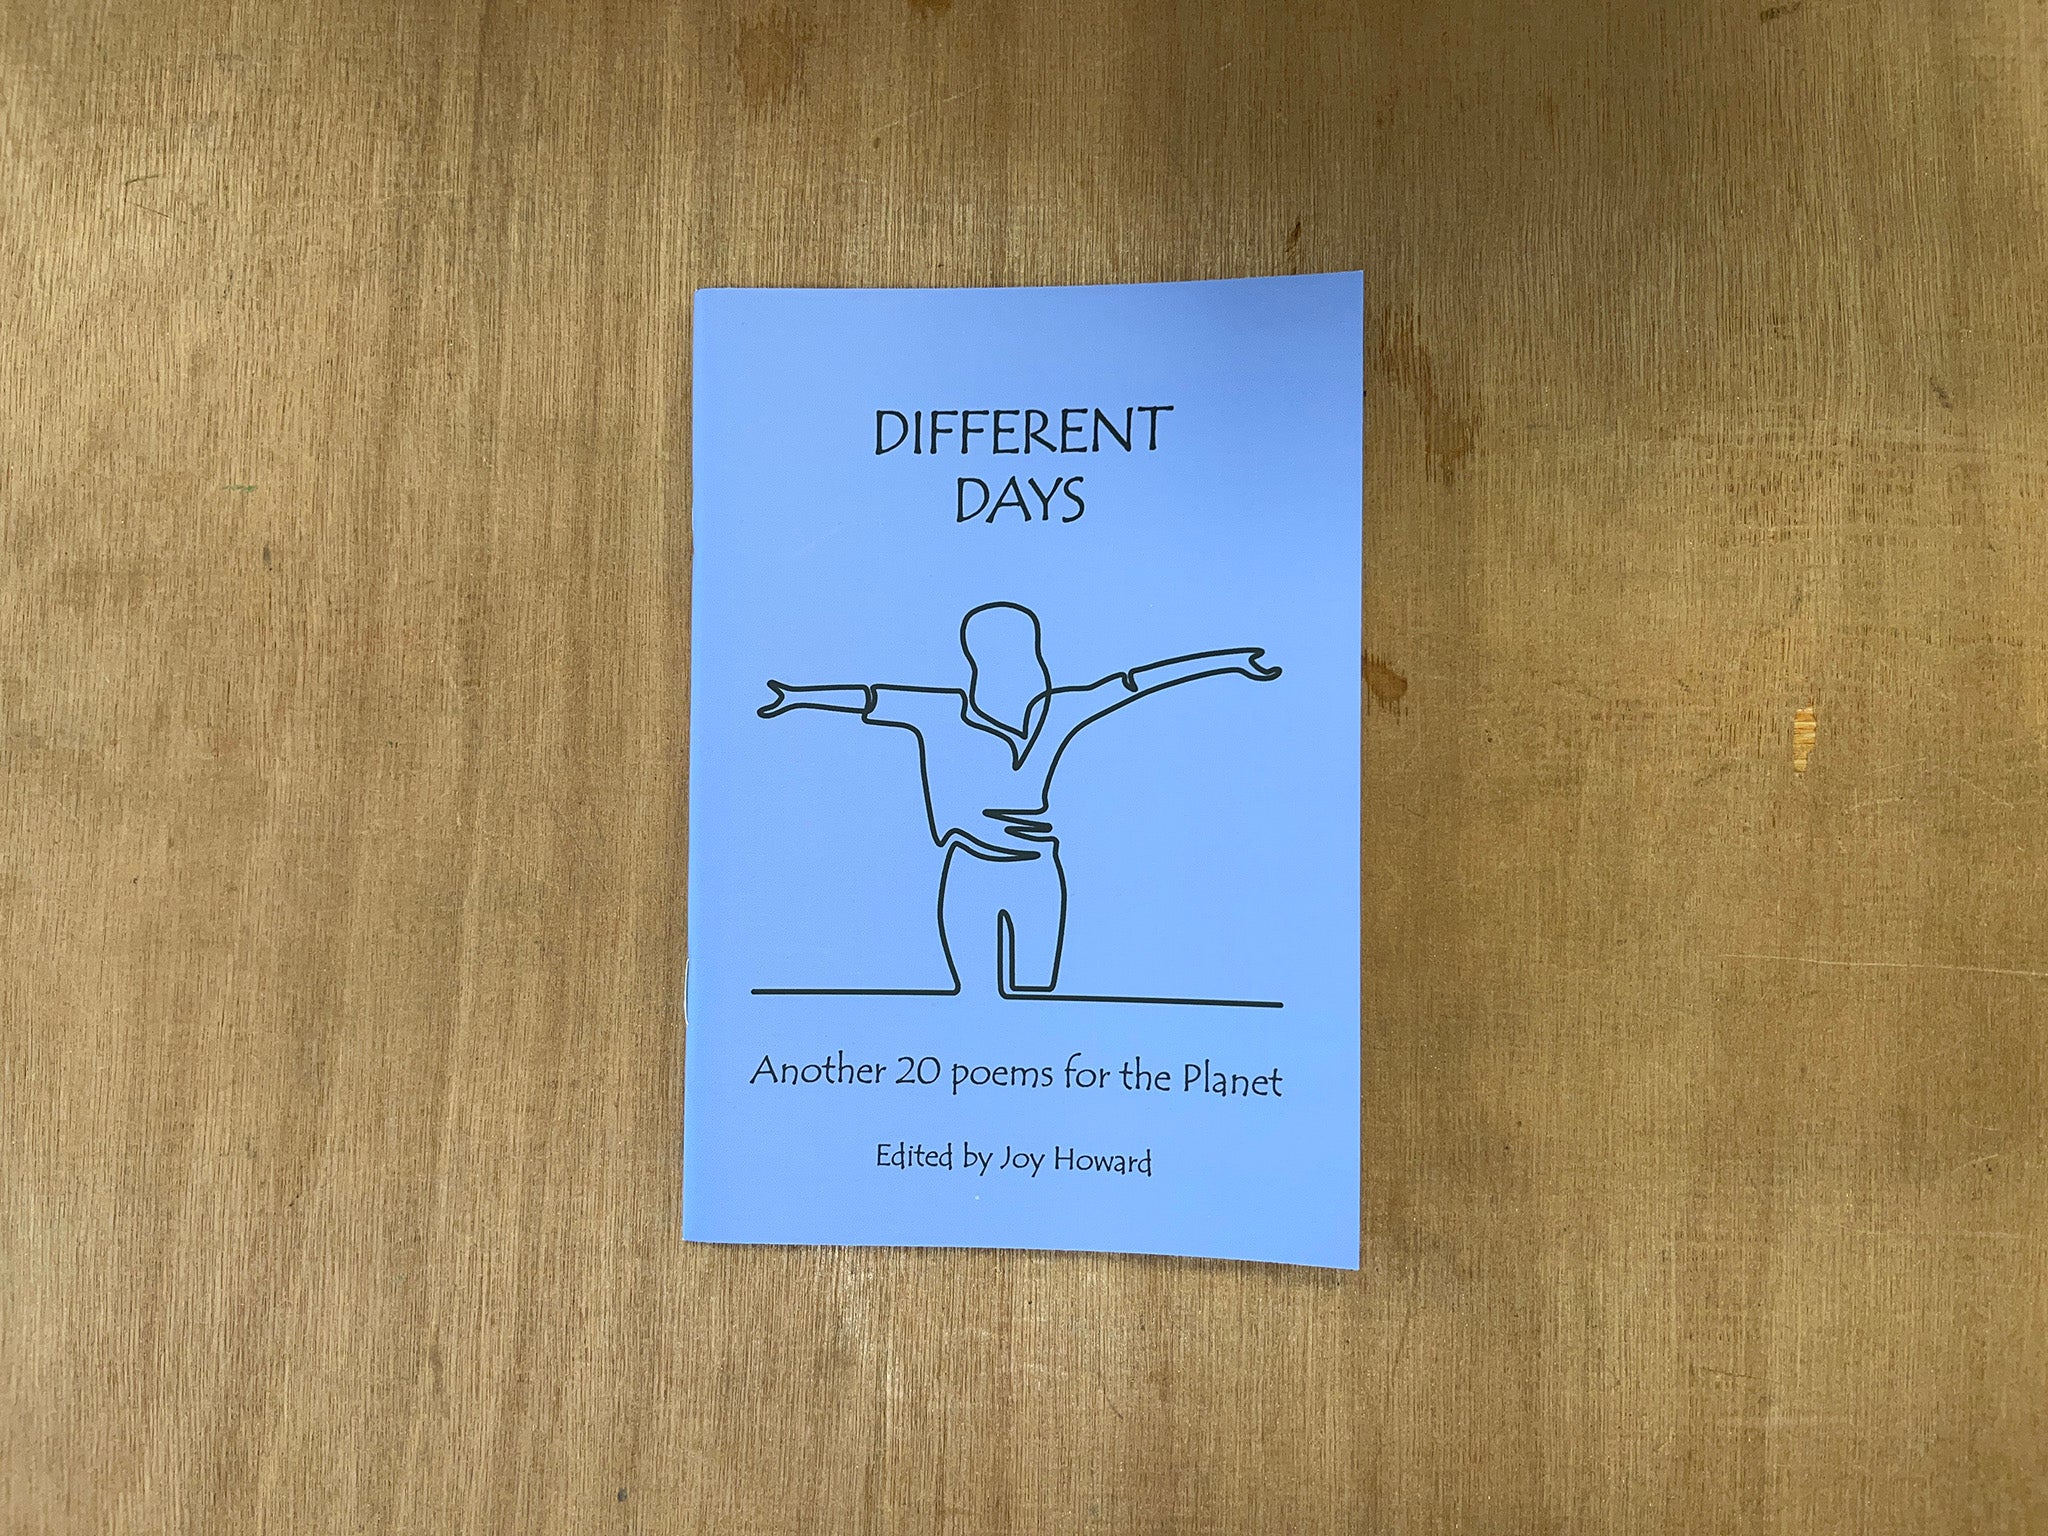 DIFFERENT DAYS by Various Authors